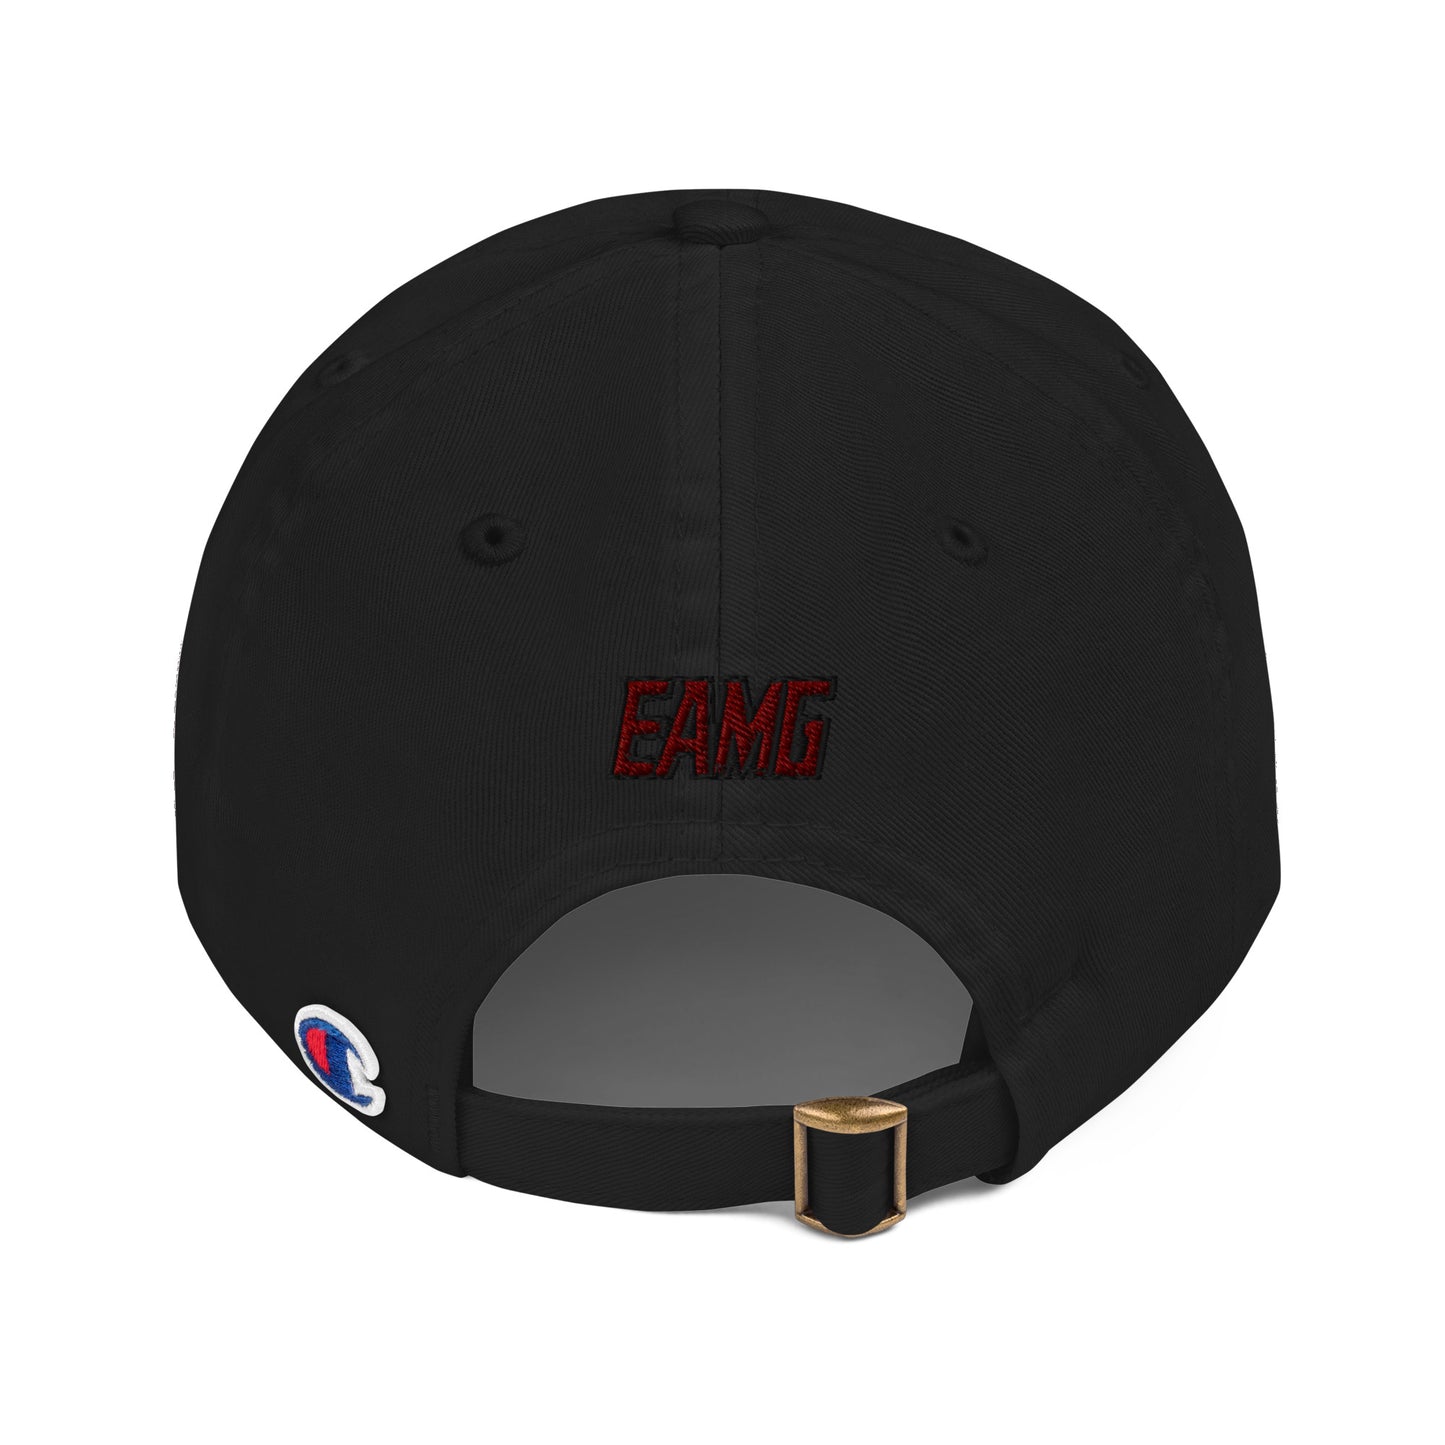 AR Embroidered Champion Dad Cap